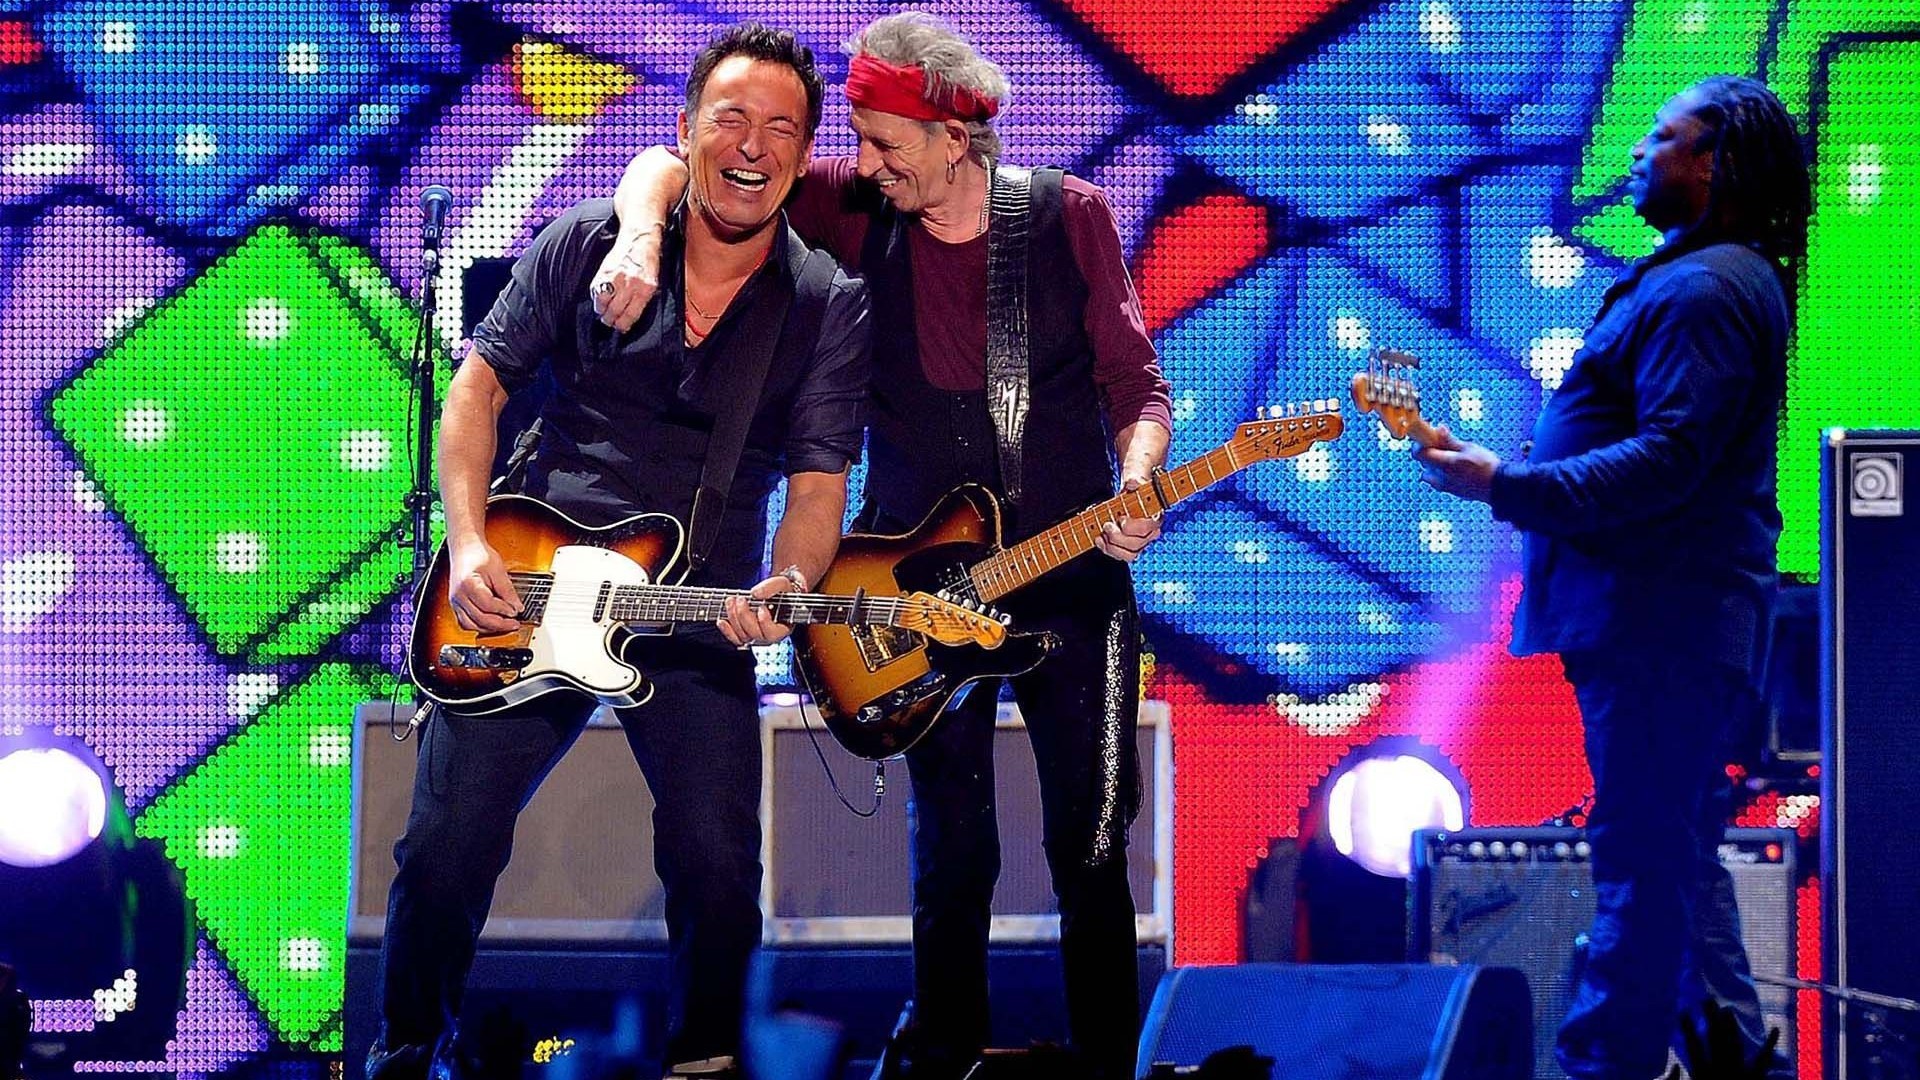 1920x1080 ... Bruce-Springsteen-with-Keith-Richards-wallpaper.jpg ...